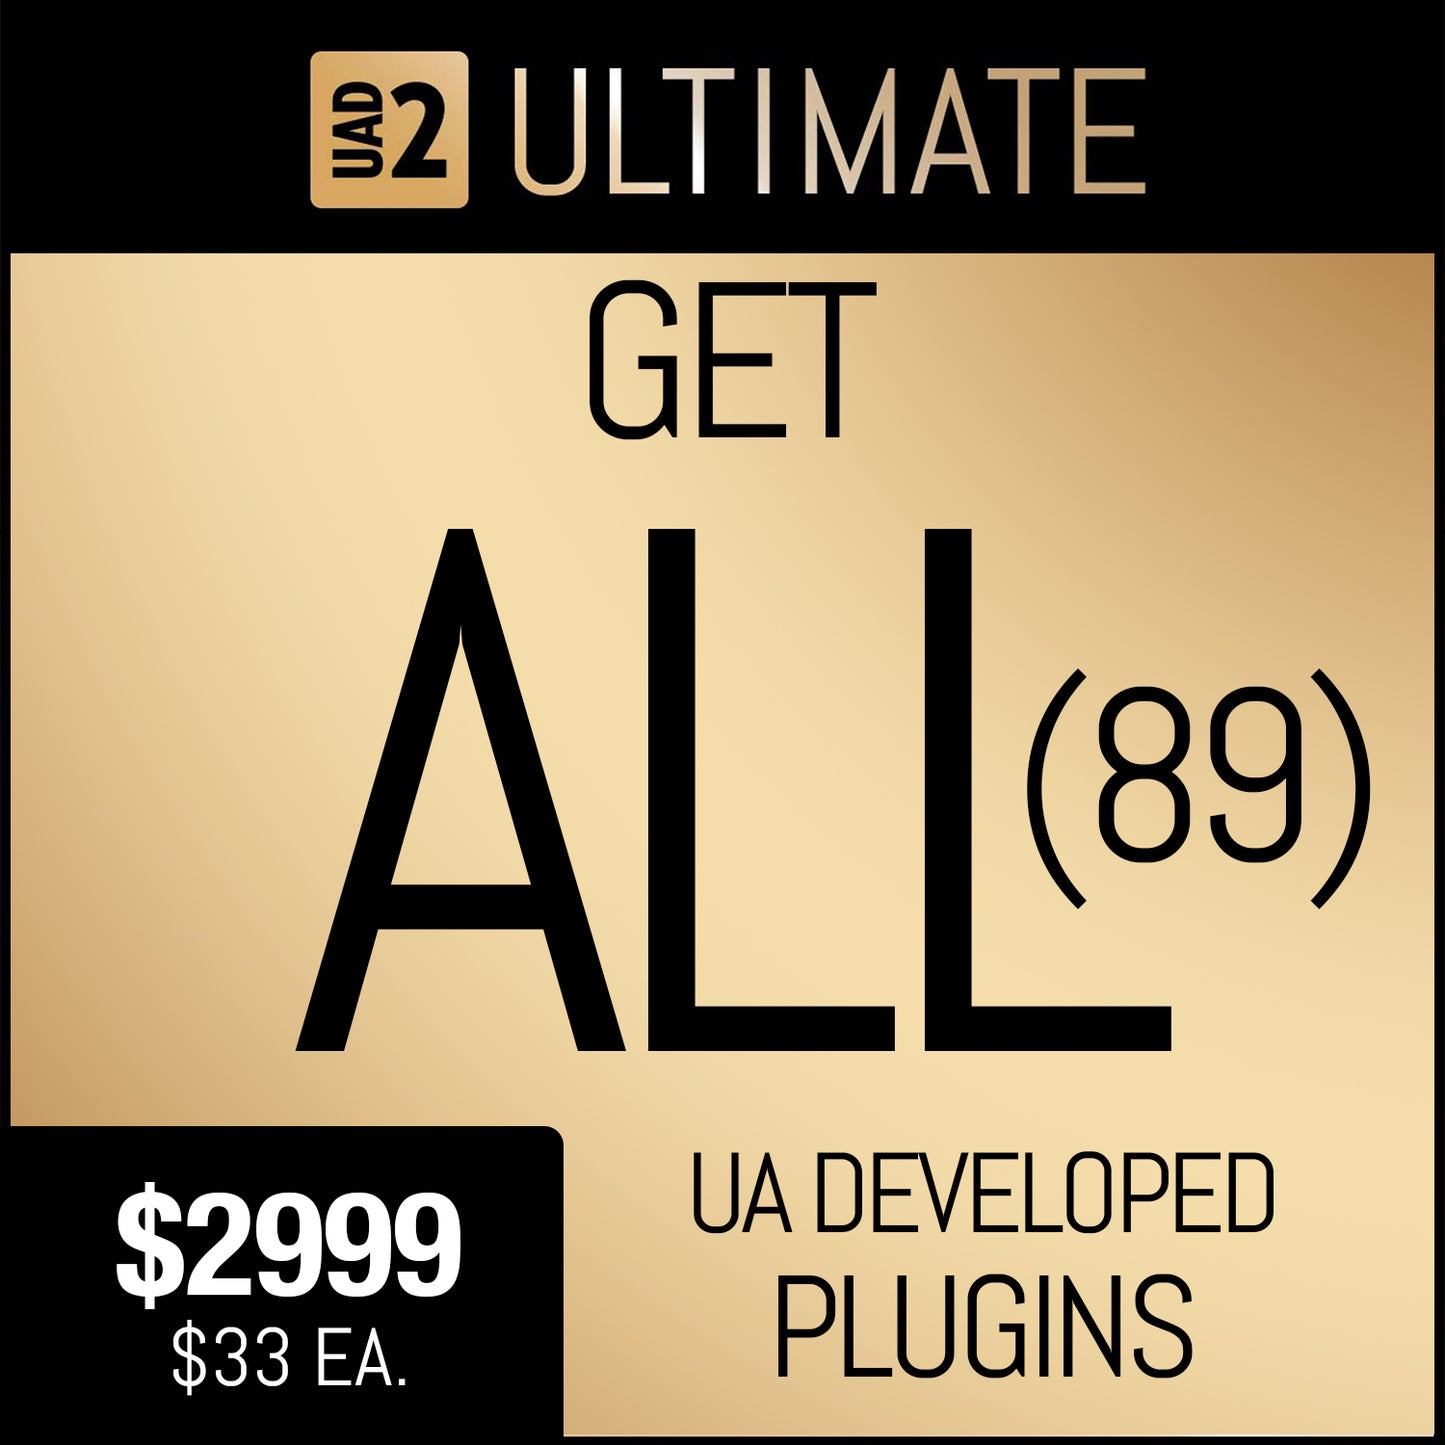 Universal Audio Ultimate Plug-in Package With the 89 UAD Plug-Ins